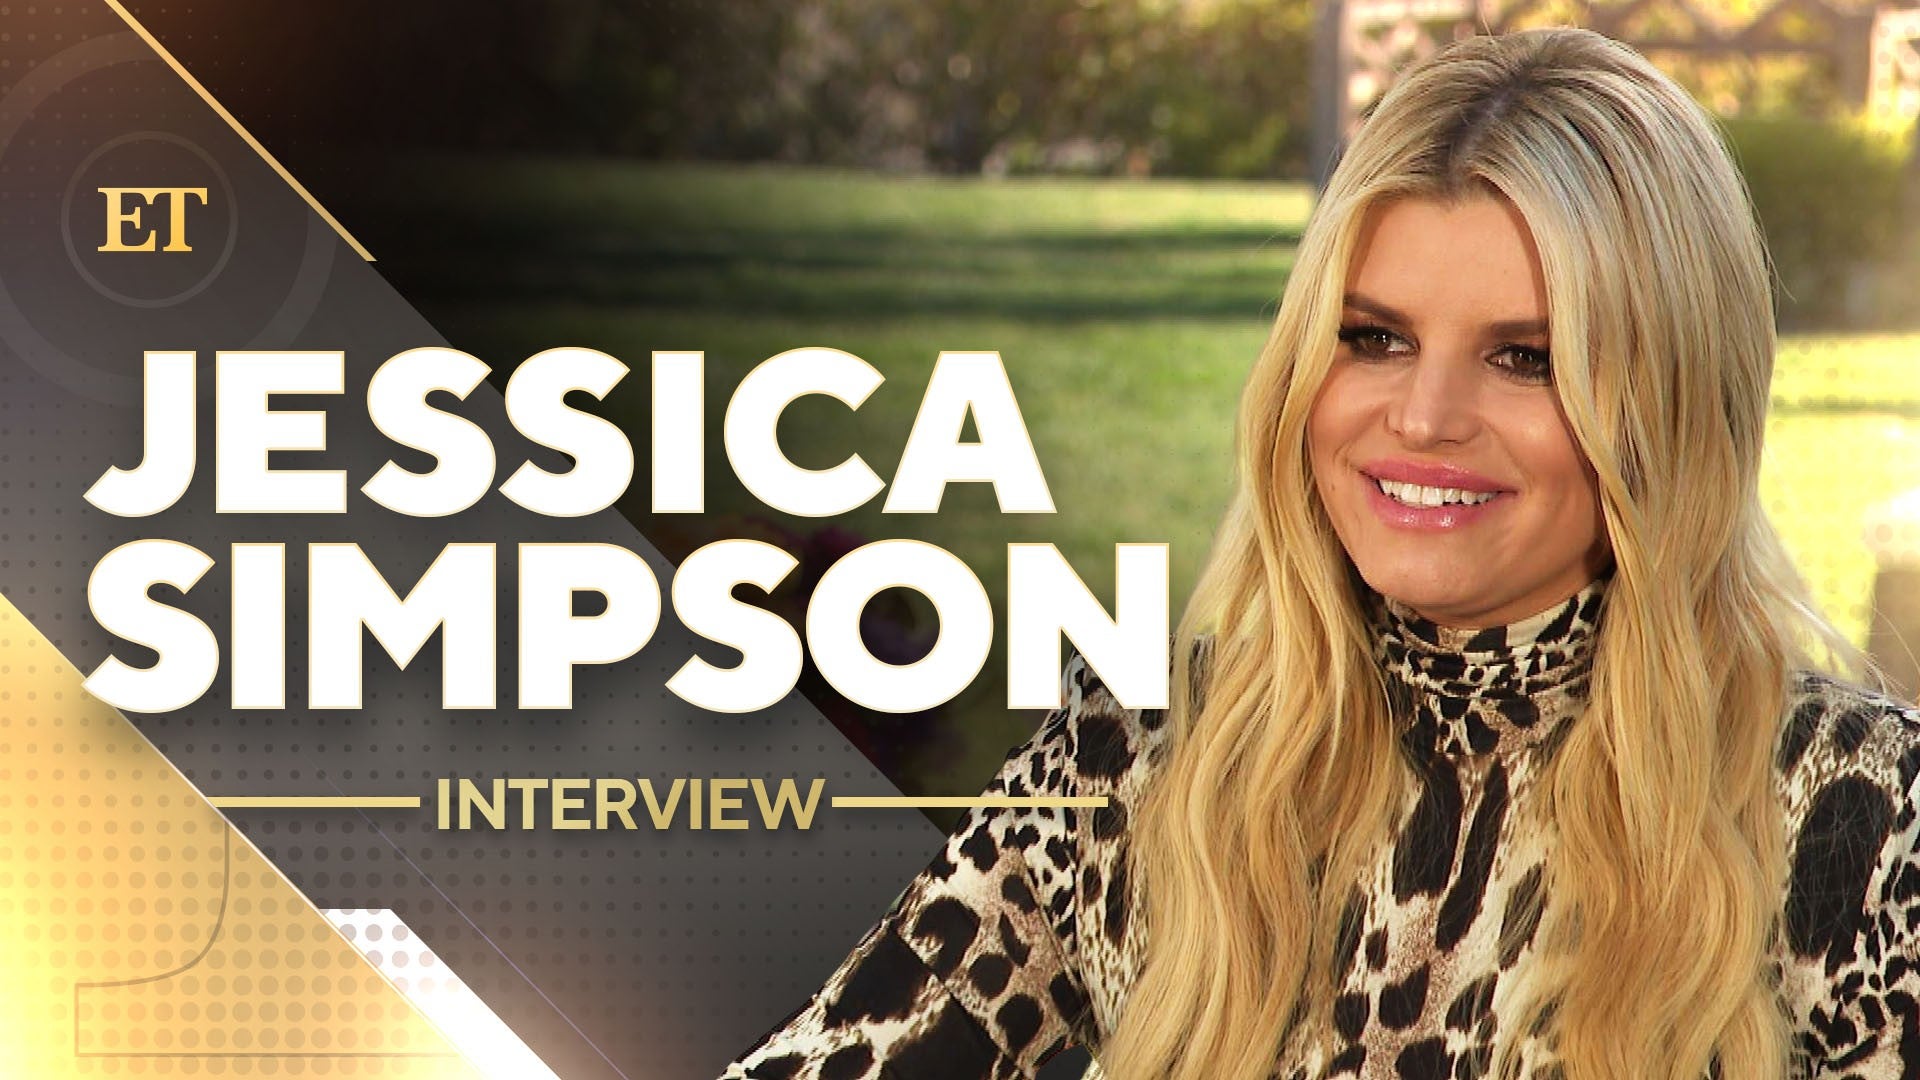 Jessica Simpson 'freaked out' over turning 40: 'I am accepting it